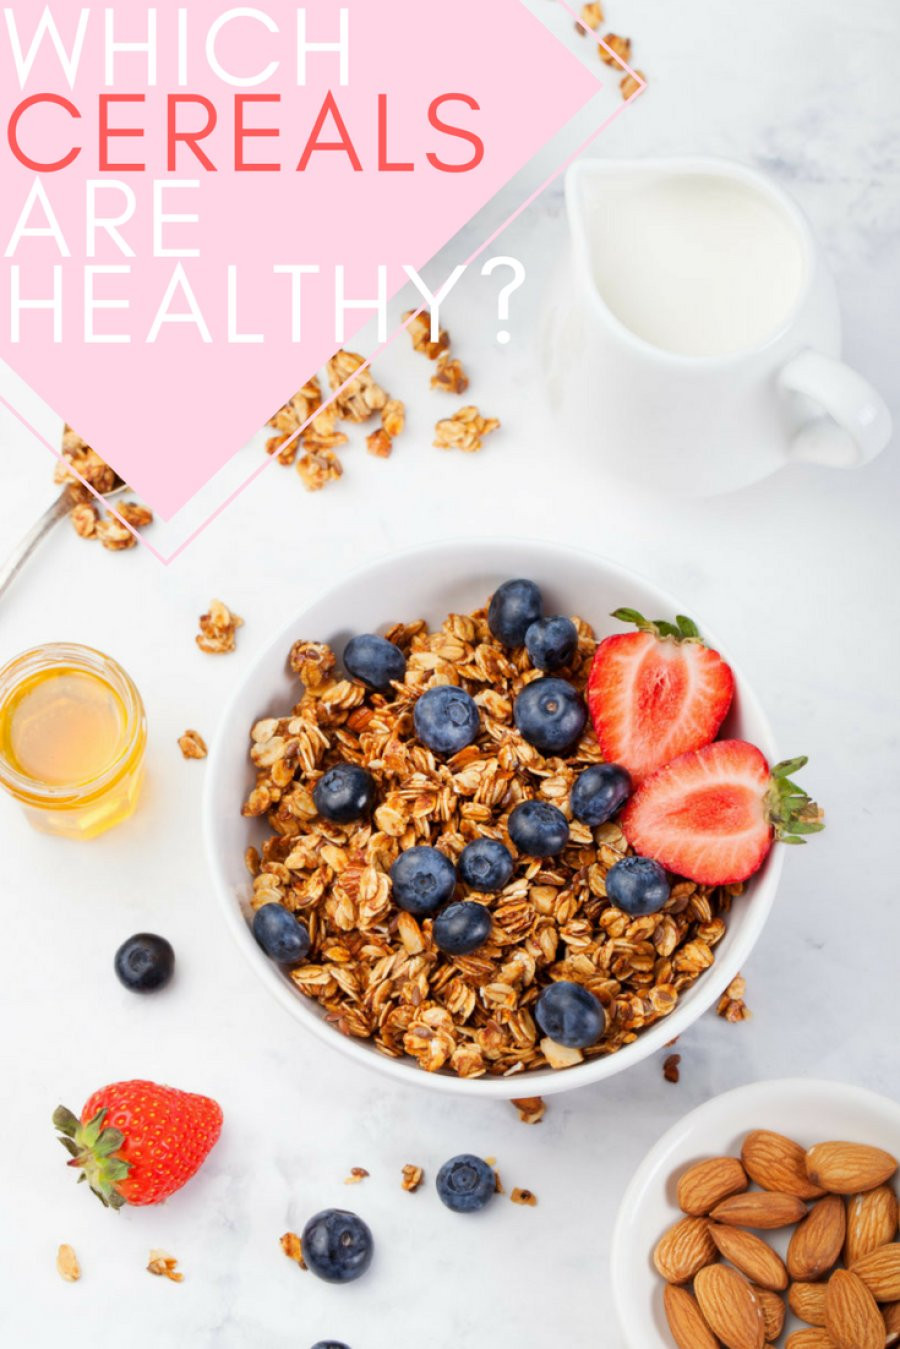 Best Breakfast Cereals
 Here Are The Breakfast Cereals That Are Actually Healthy